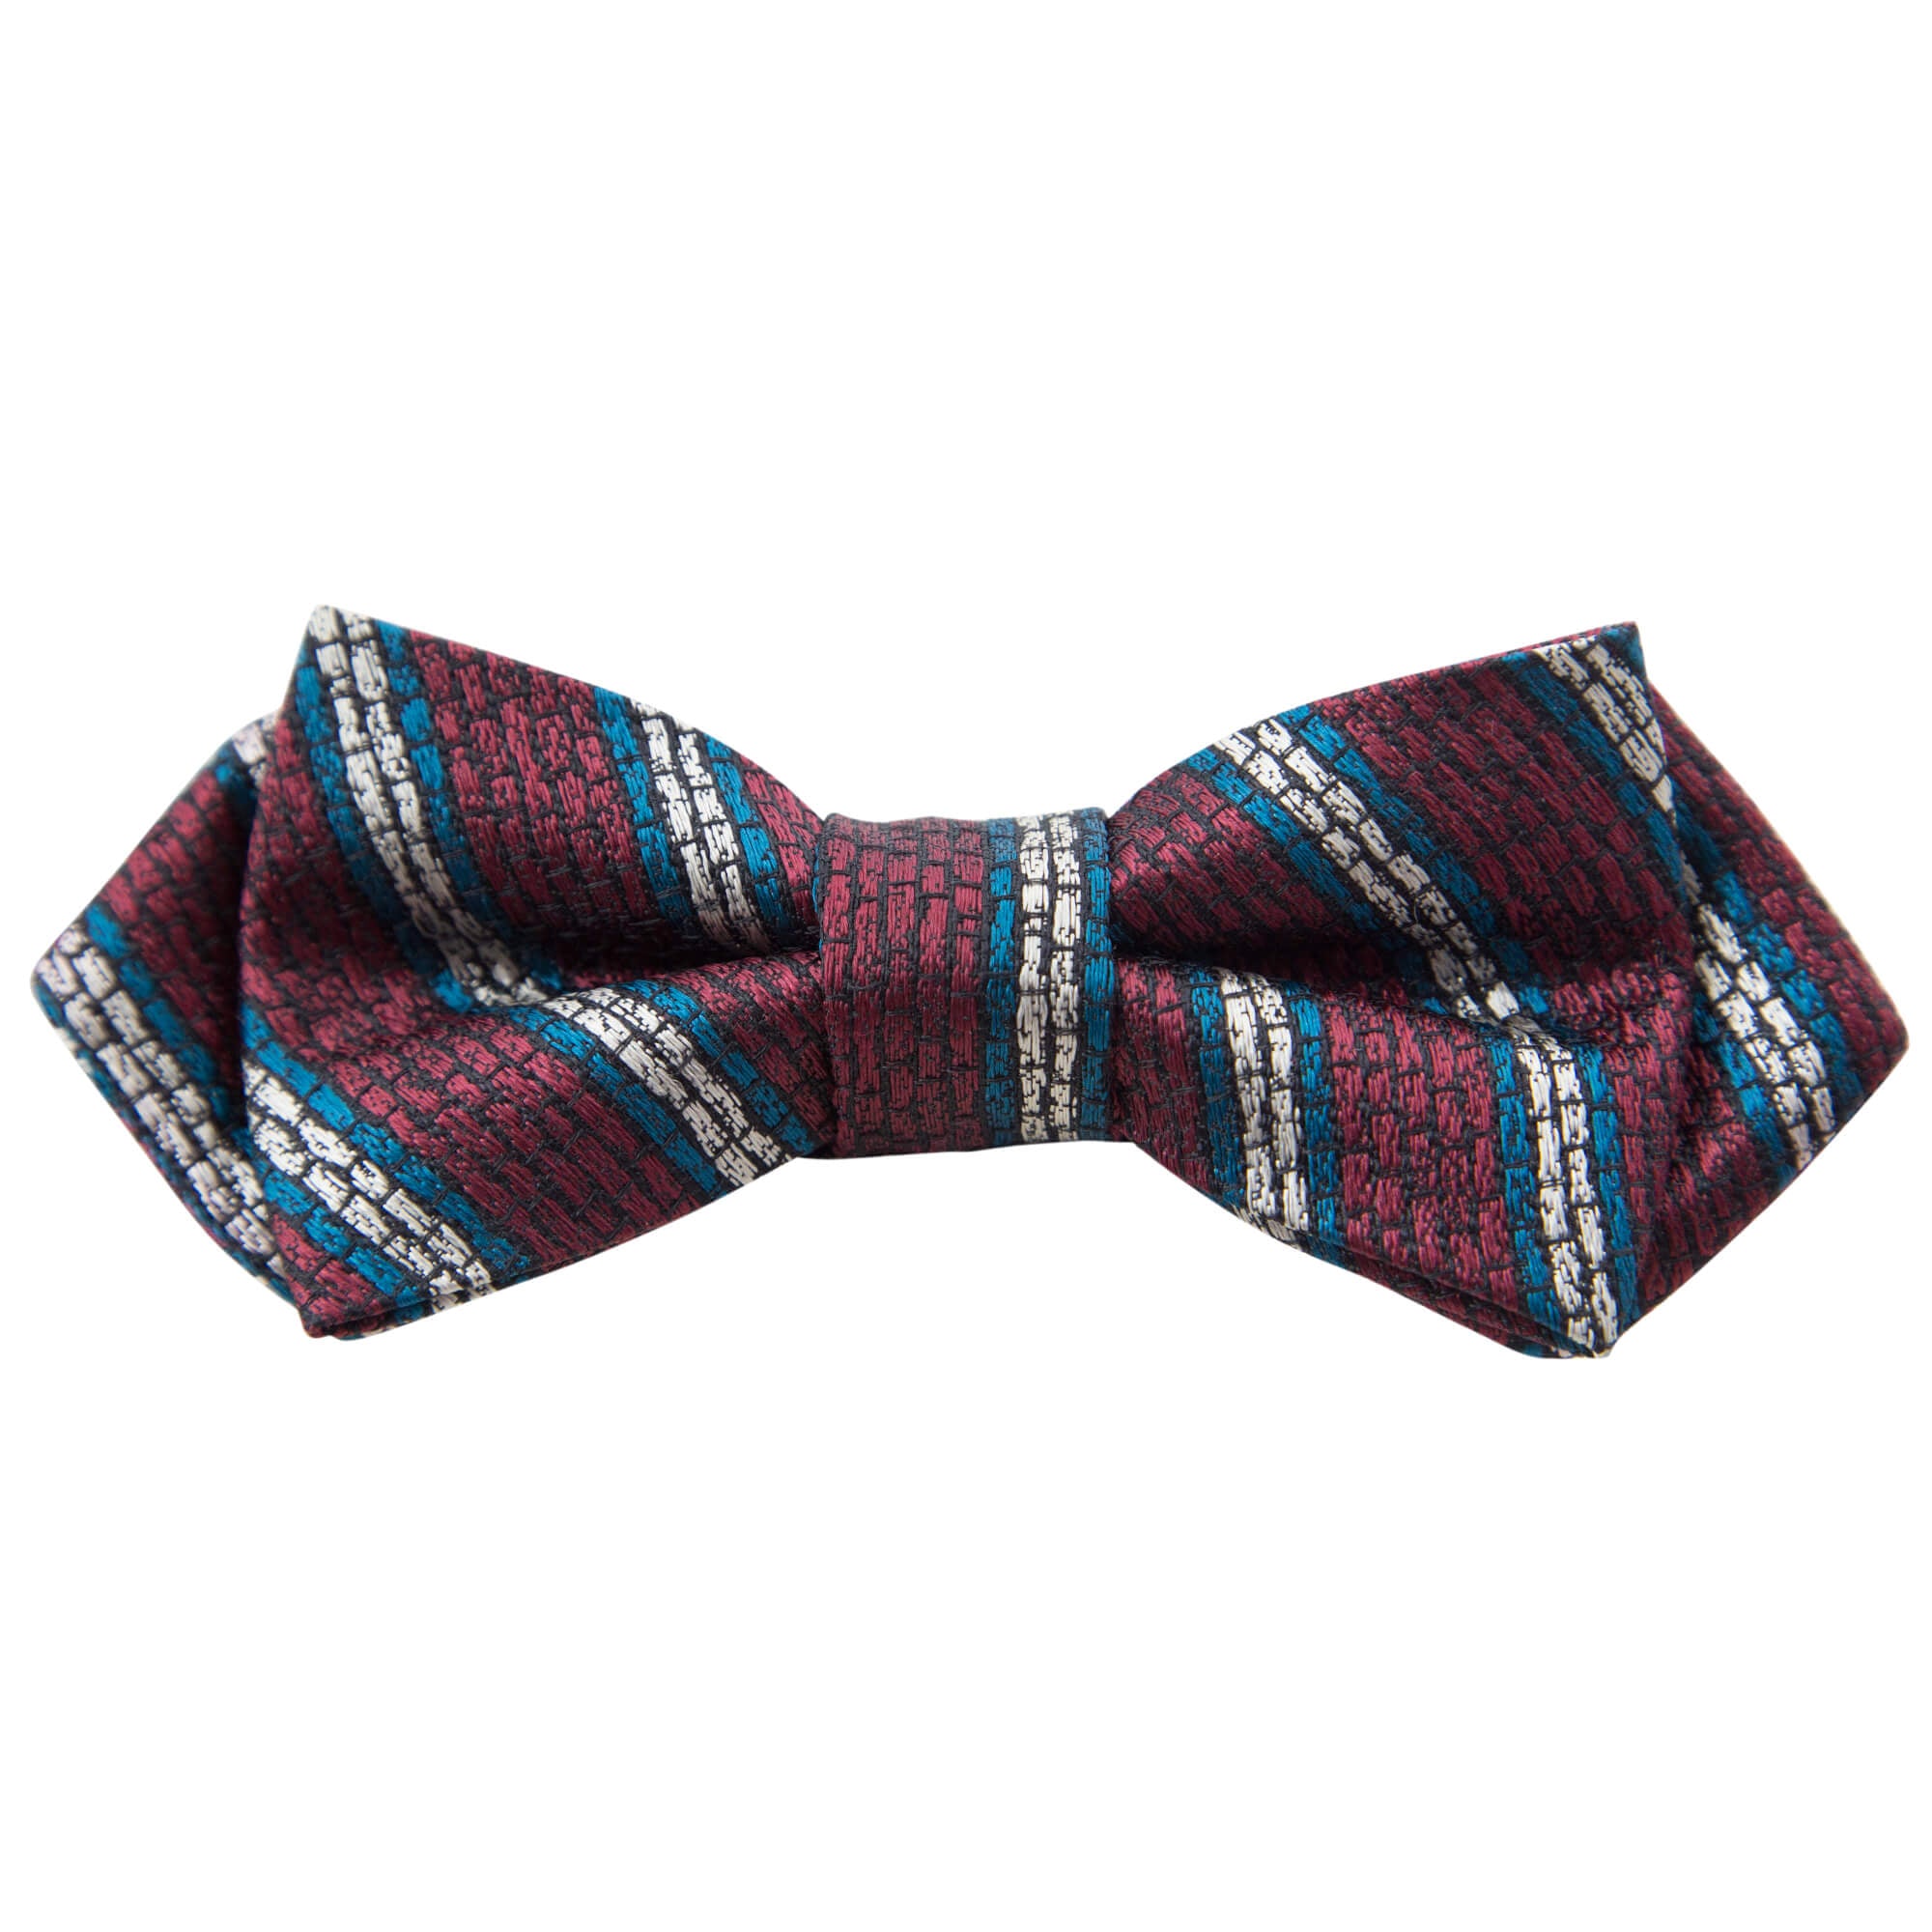 RED WITH TEAL AND BEIGE STRIPES BOW TIE